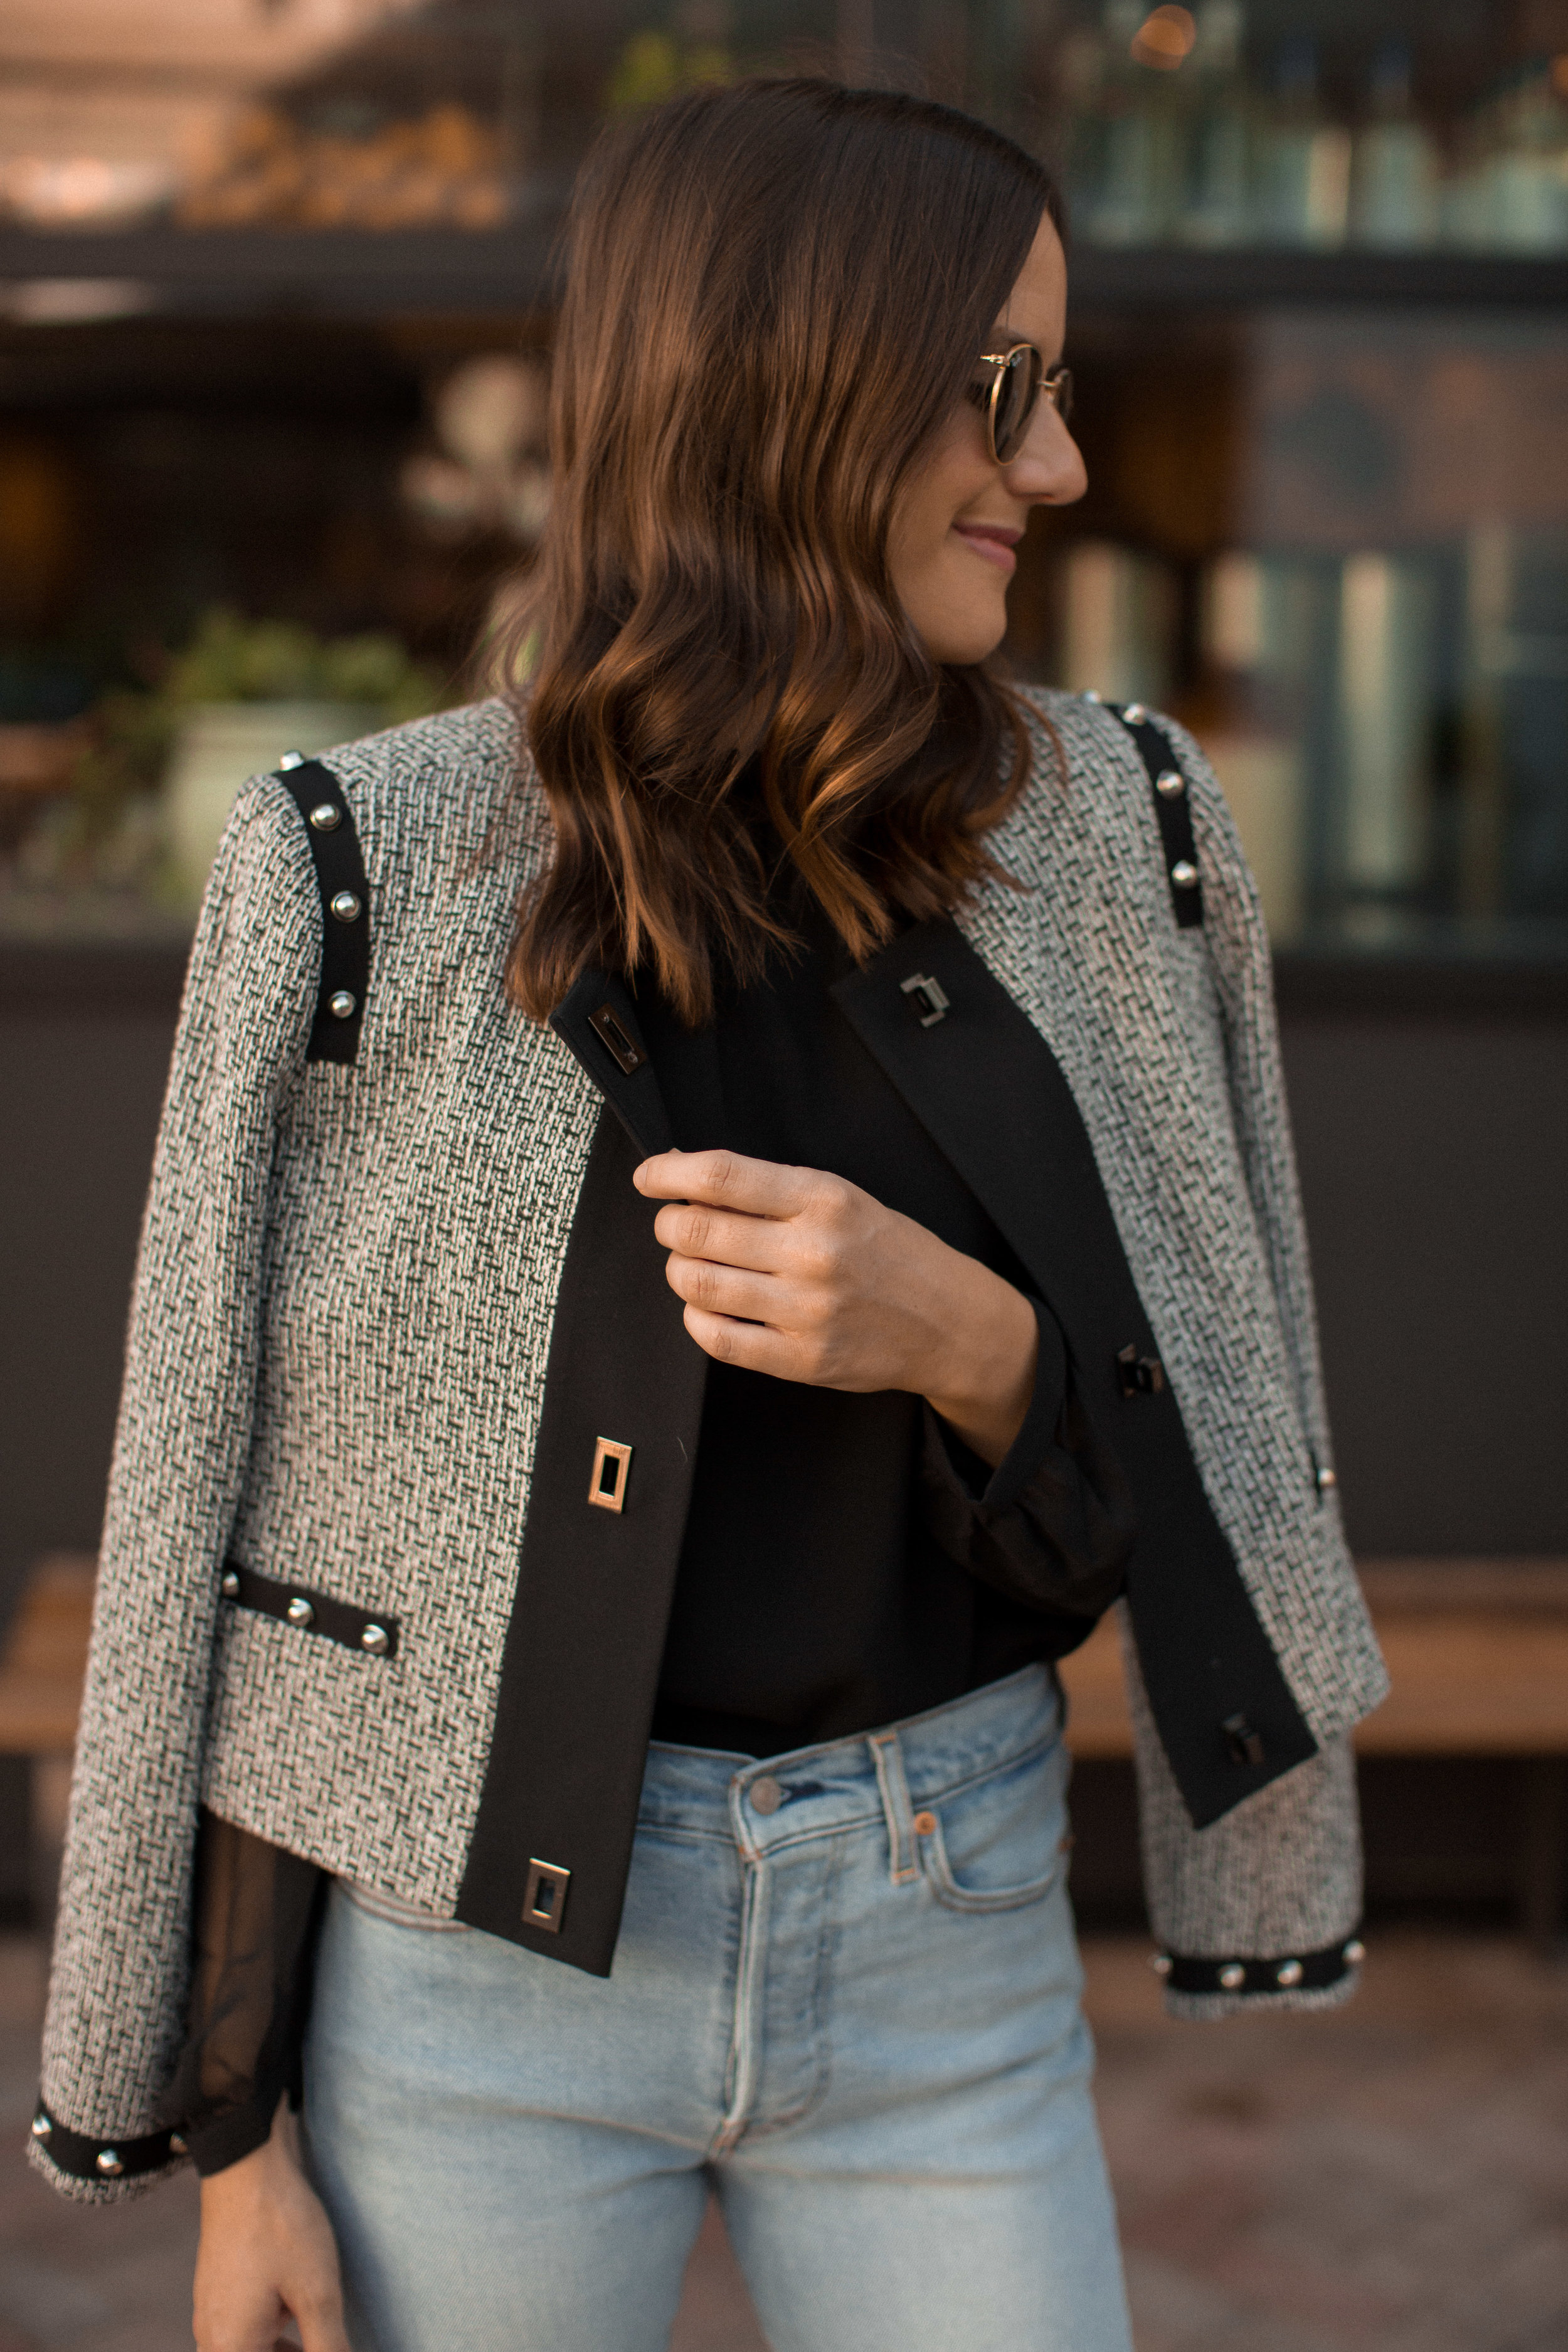 Work to Holiday Party | Black Lace Blouse and Tweed Jacket — Girl Meets Gold